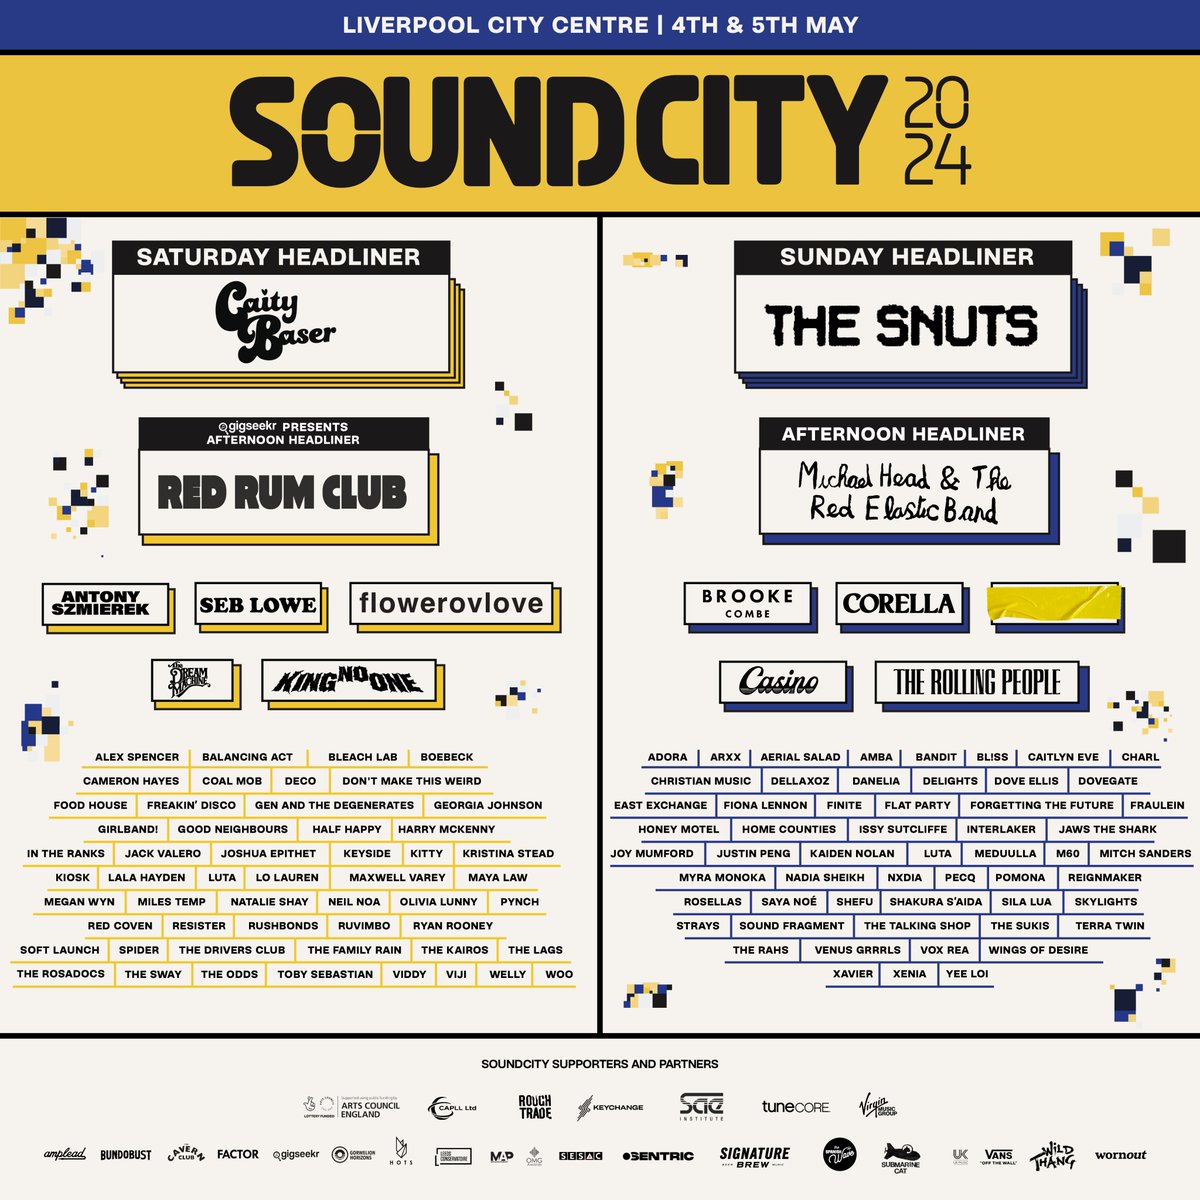 STAGE SPLITS ARE HERE! ⚡️ Sound Citizens, we are edging closer and closer to the big weekend, and we are buzzing to share stage splits today 🖖 Which stage will you be camped out at? 👇 🎟️ Join us in Liverpool on 4-5 May: soundcity.seetickets.com